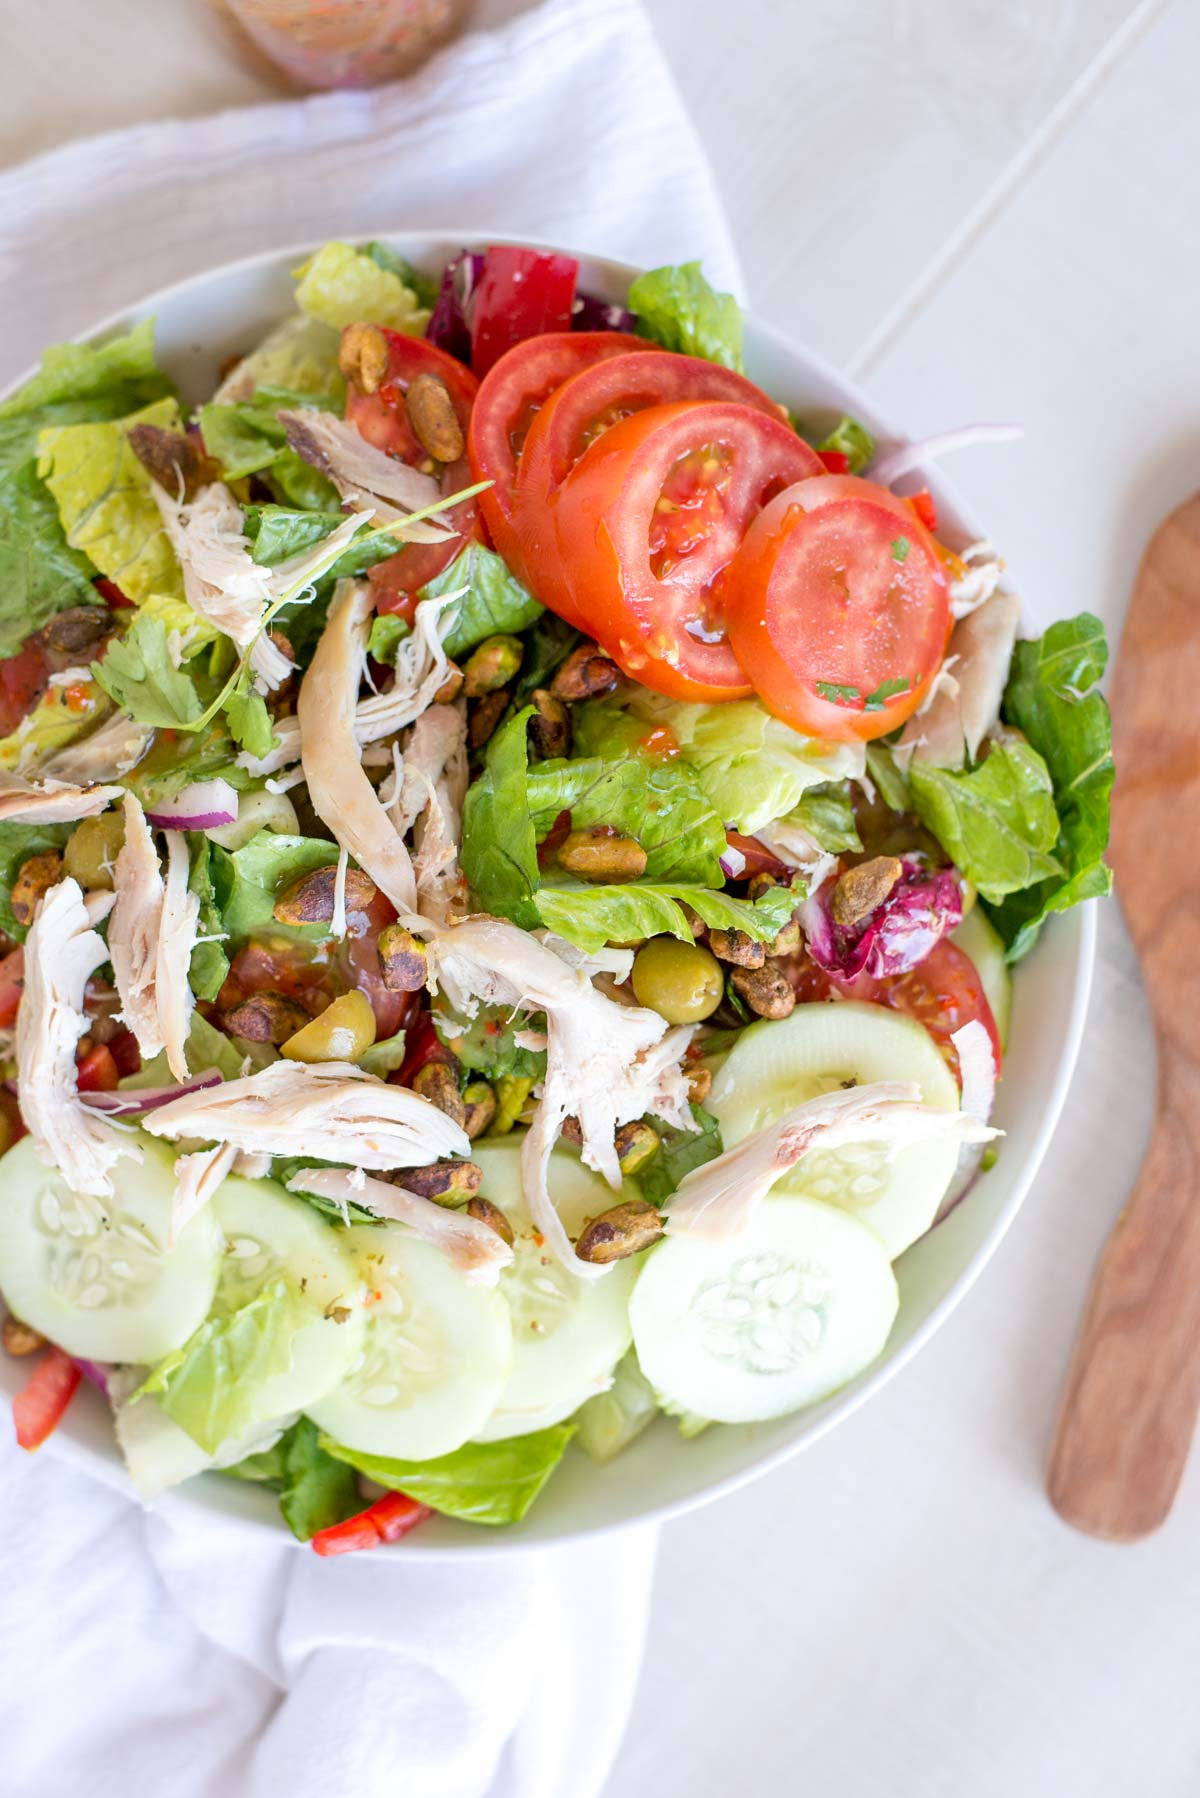 The most delicious salad you'll ever eat that takes 10 minutes to prep. Quick Italian Salad with Shredded Chicken